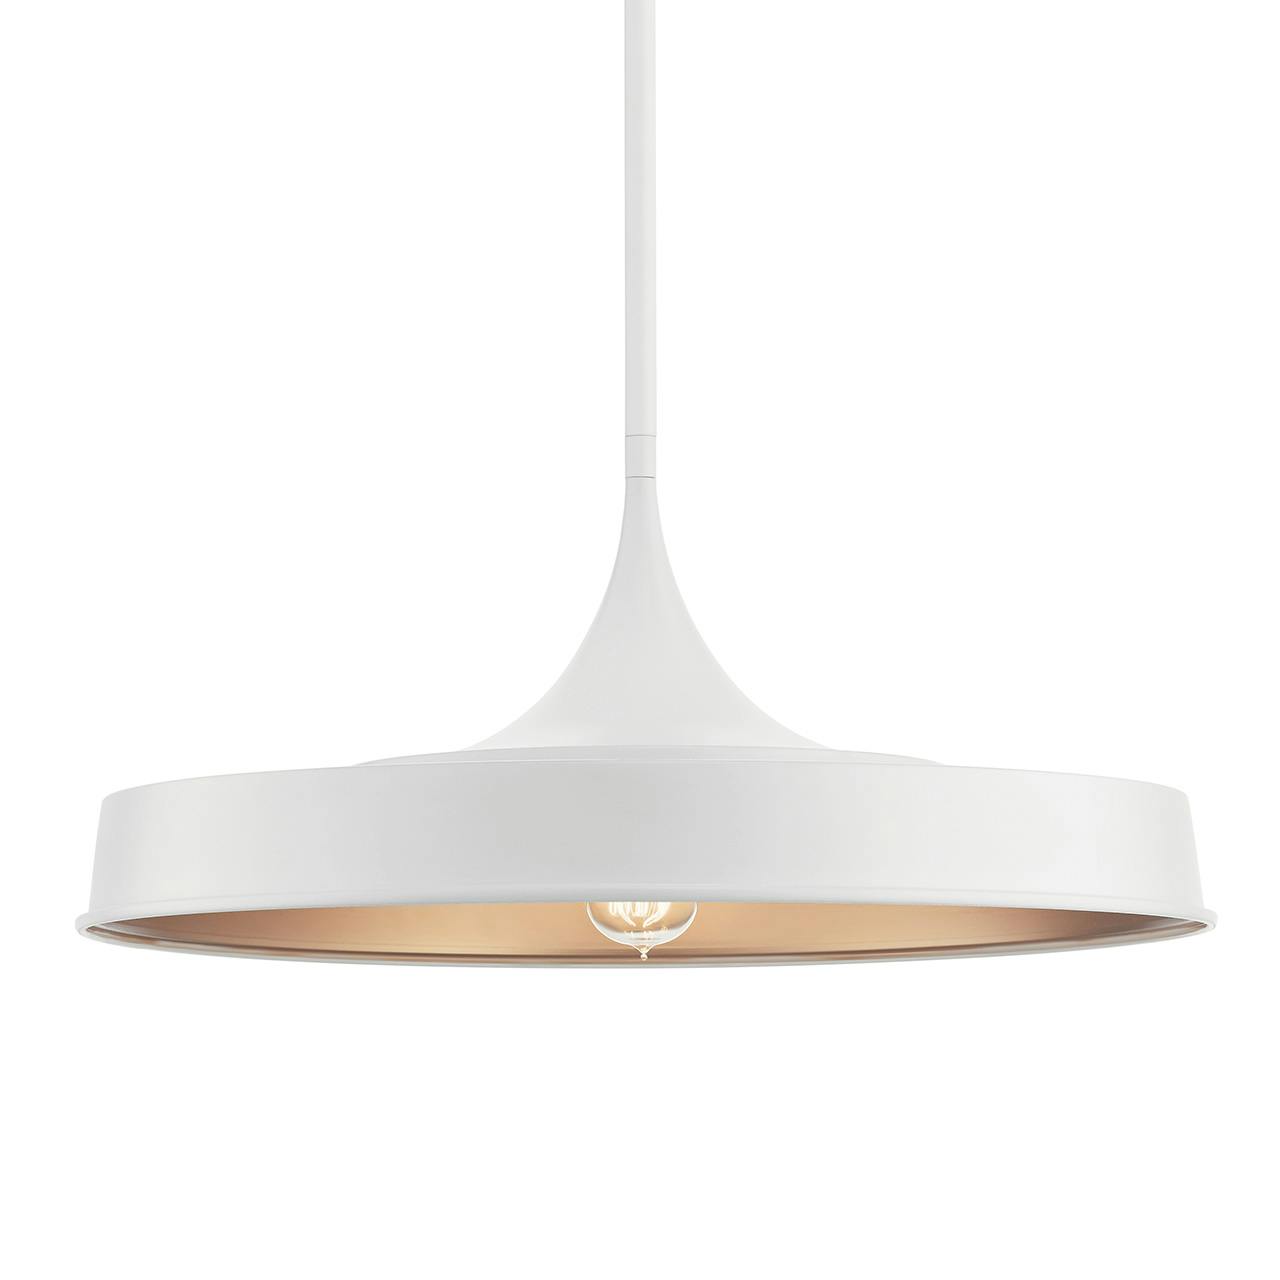 Elias 9.75" Convertible Pendant White without the canopy on a white background